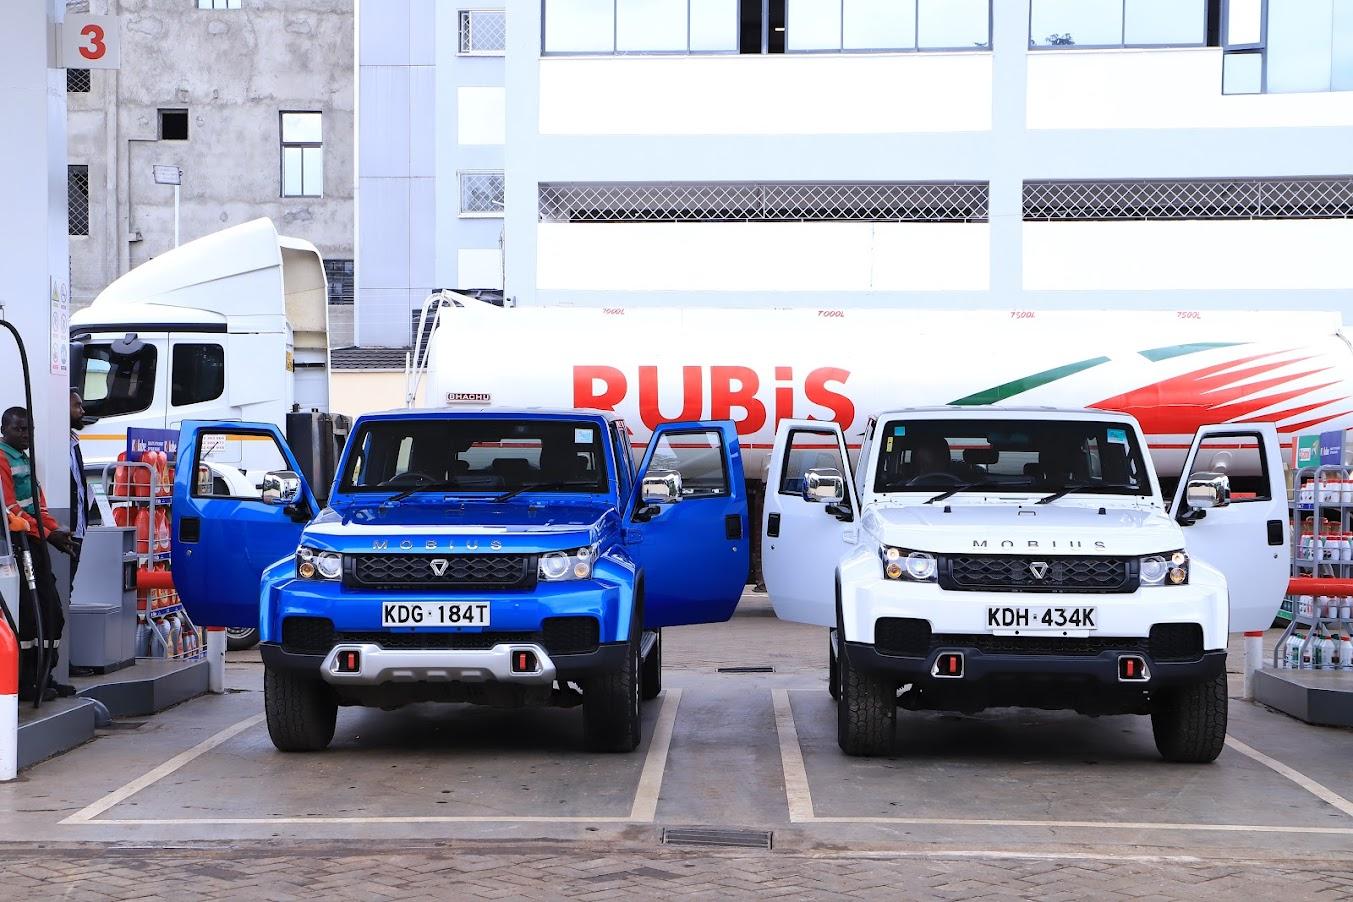 RUBIS ENERGY KENYA LAUNCHES PARTNERSHIP WITH MOBIUS MOTORS FOR  CAR CARE SERVICES